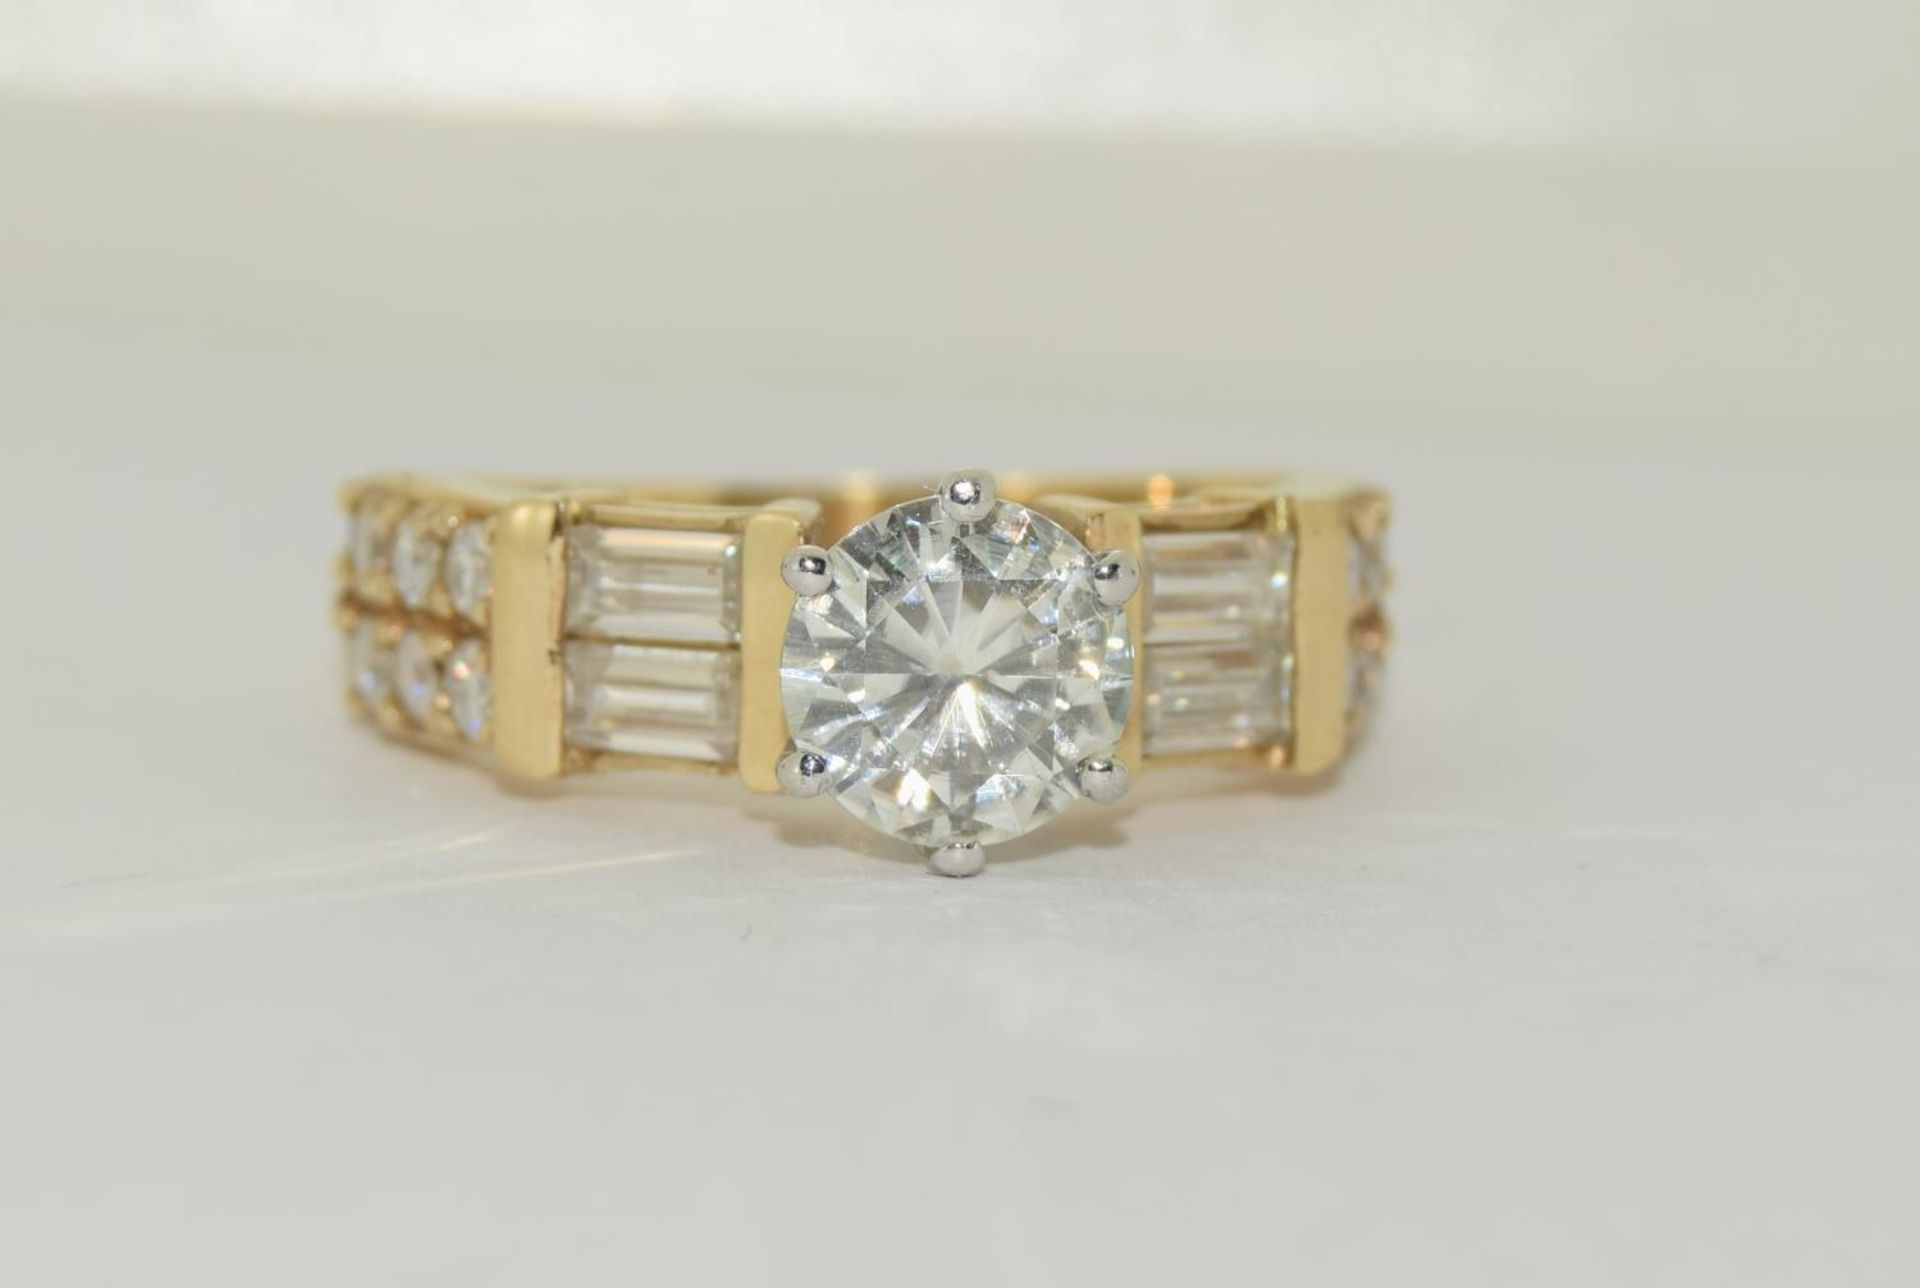 9ct gold Moissanite Diamond ring - 1.00ct centre stone, baguette/round stones on sides. Size M+. - Image 5 of 5